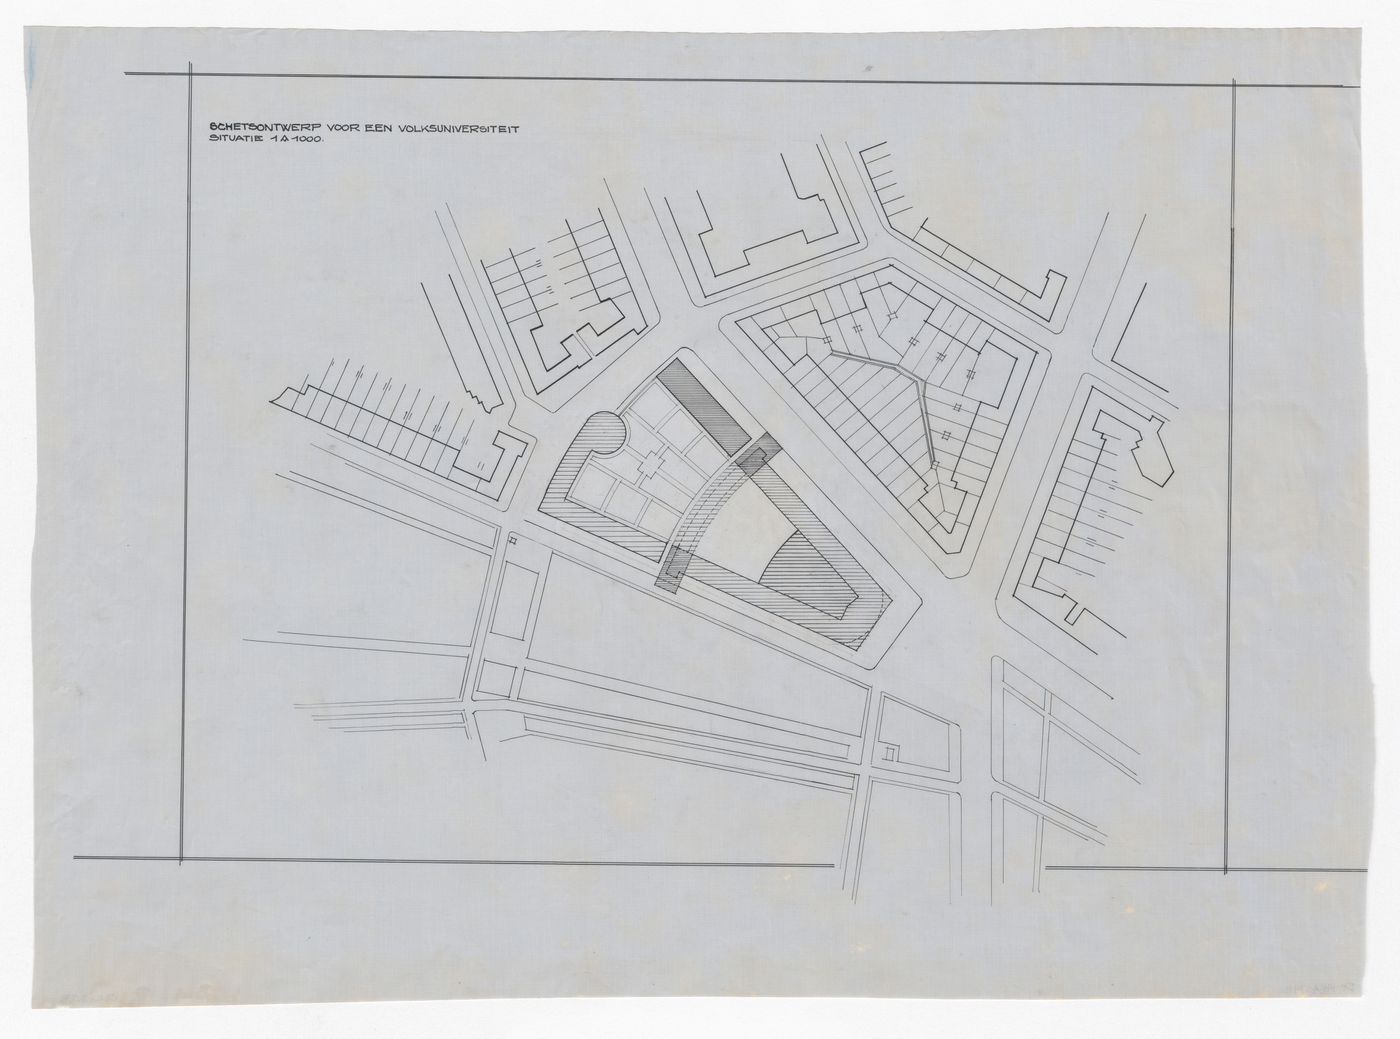 Site plan for the 1926 design for People's University, Rotterdam, Netherlands